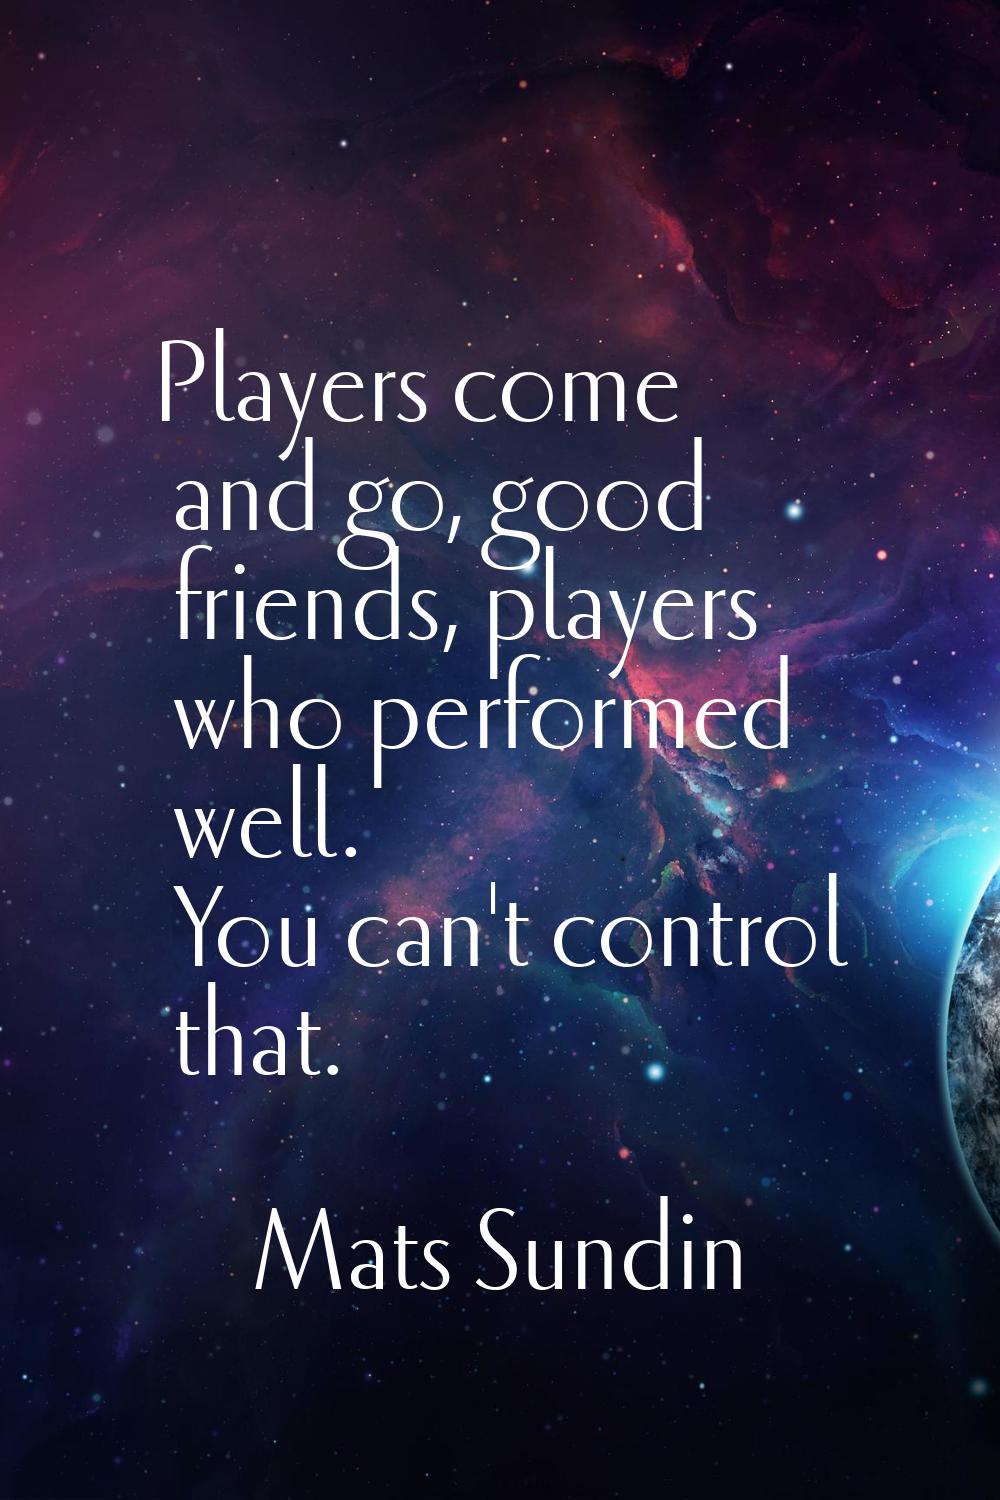 Players come and go, good friends, players who performed well. You can't control that.